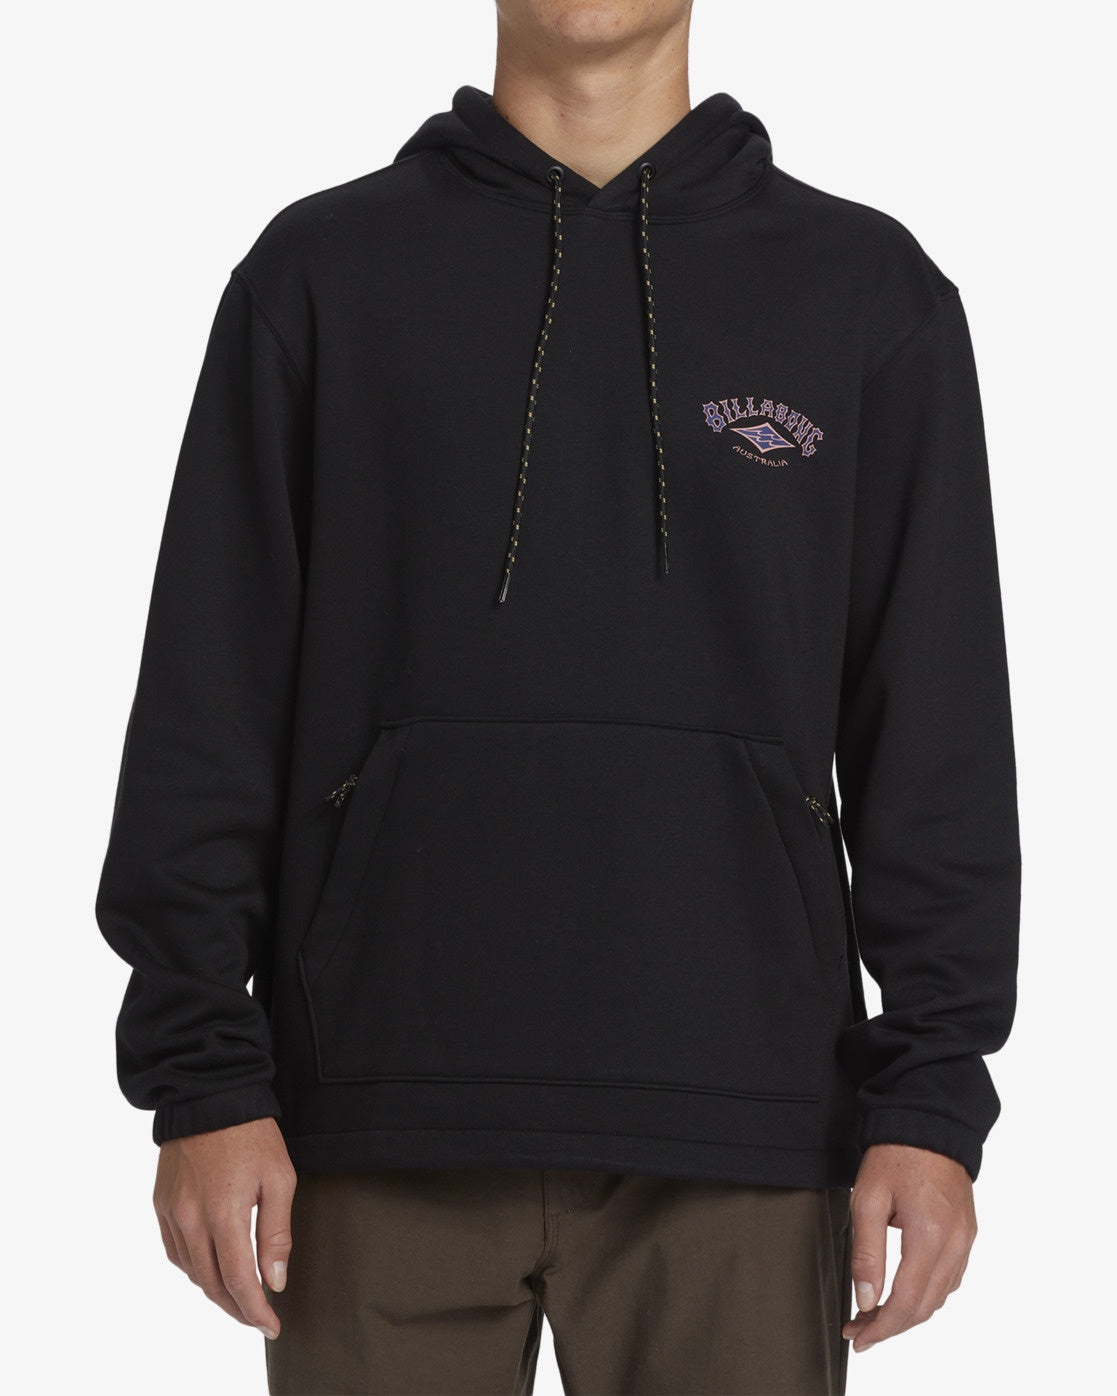 A/DIV Compass Pullover Hoodie